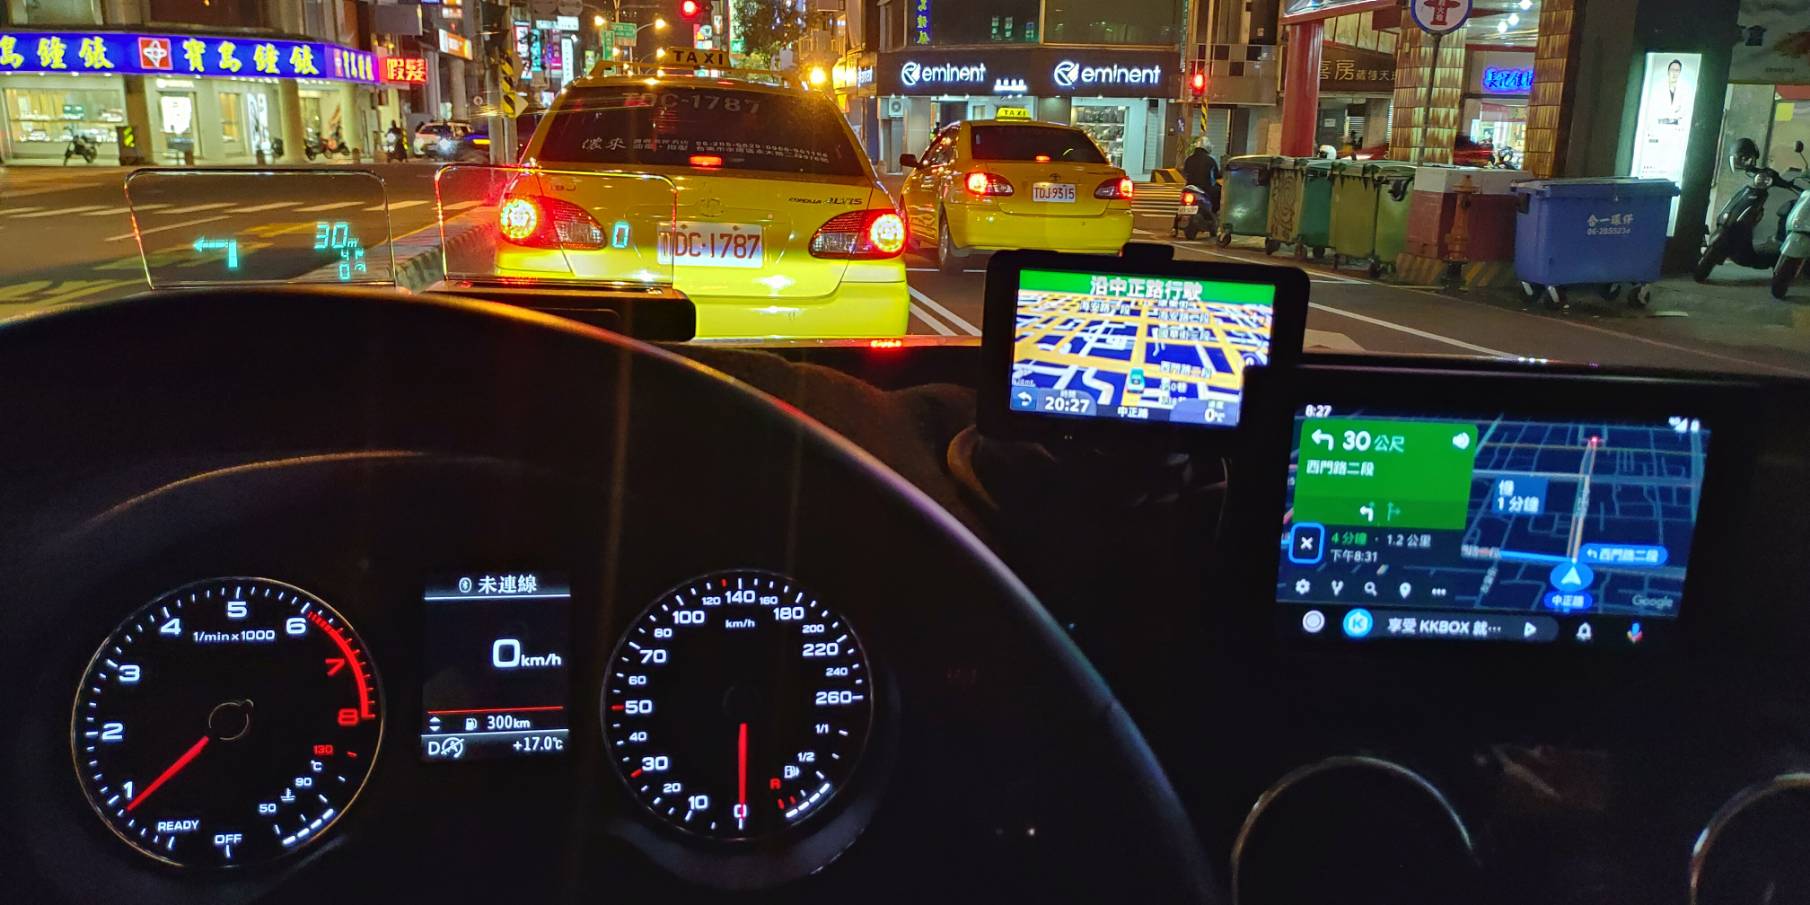 Two Garmin HUD application + Android Auto